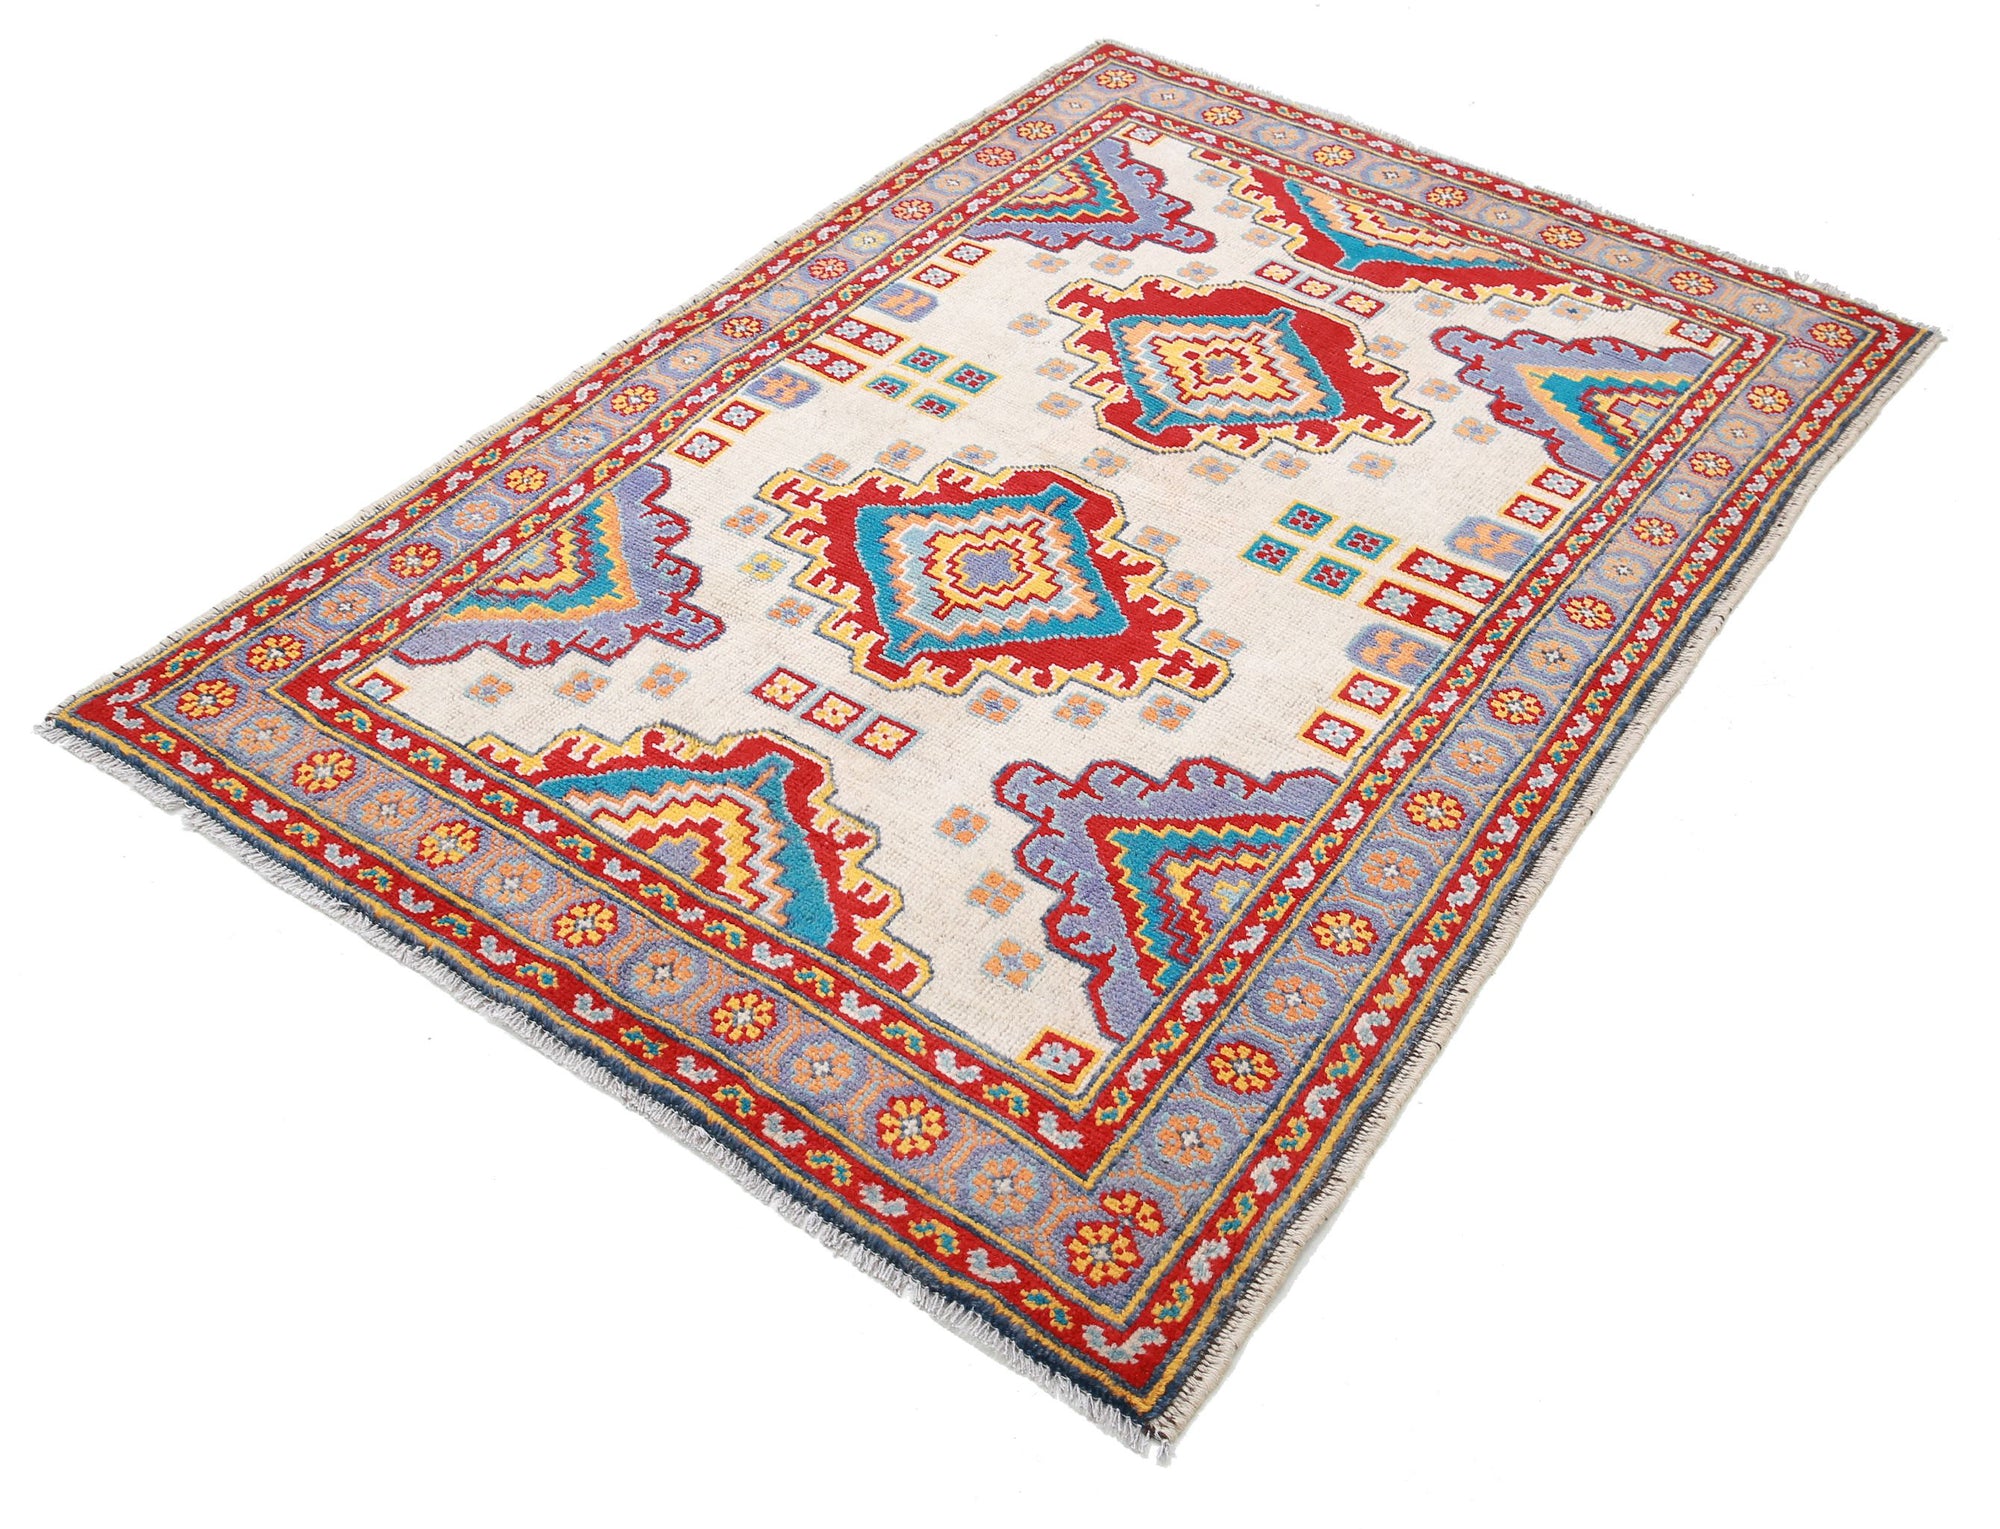 Revival-hand-knotted-qarghani-wool-rug-5014211-2.jpg